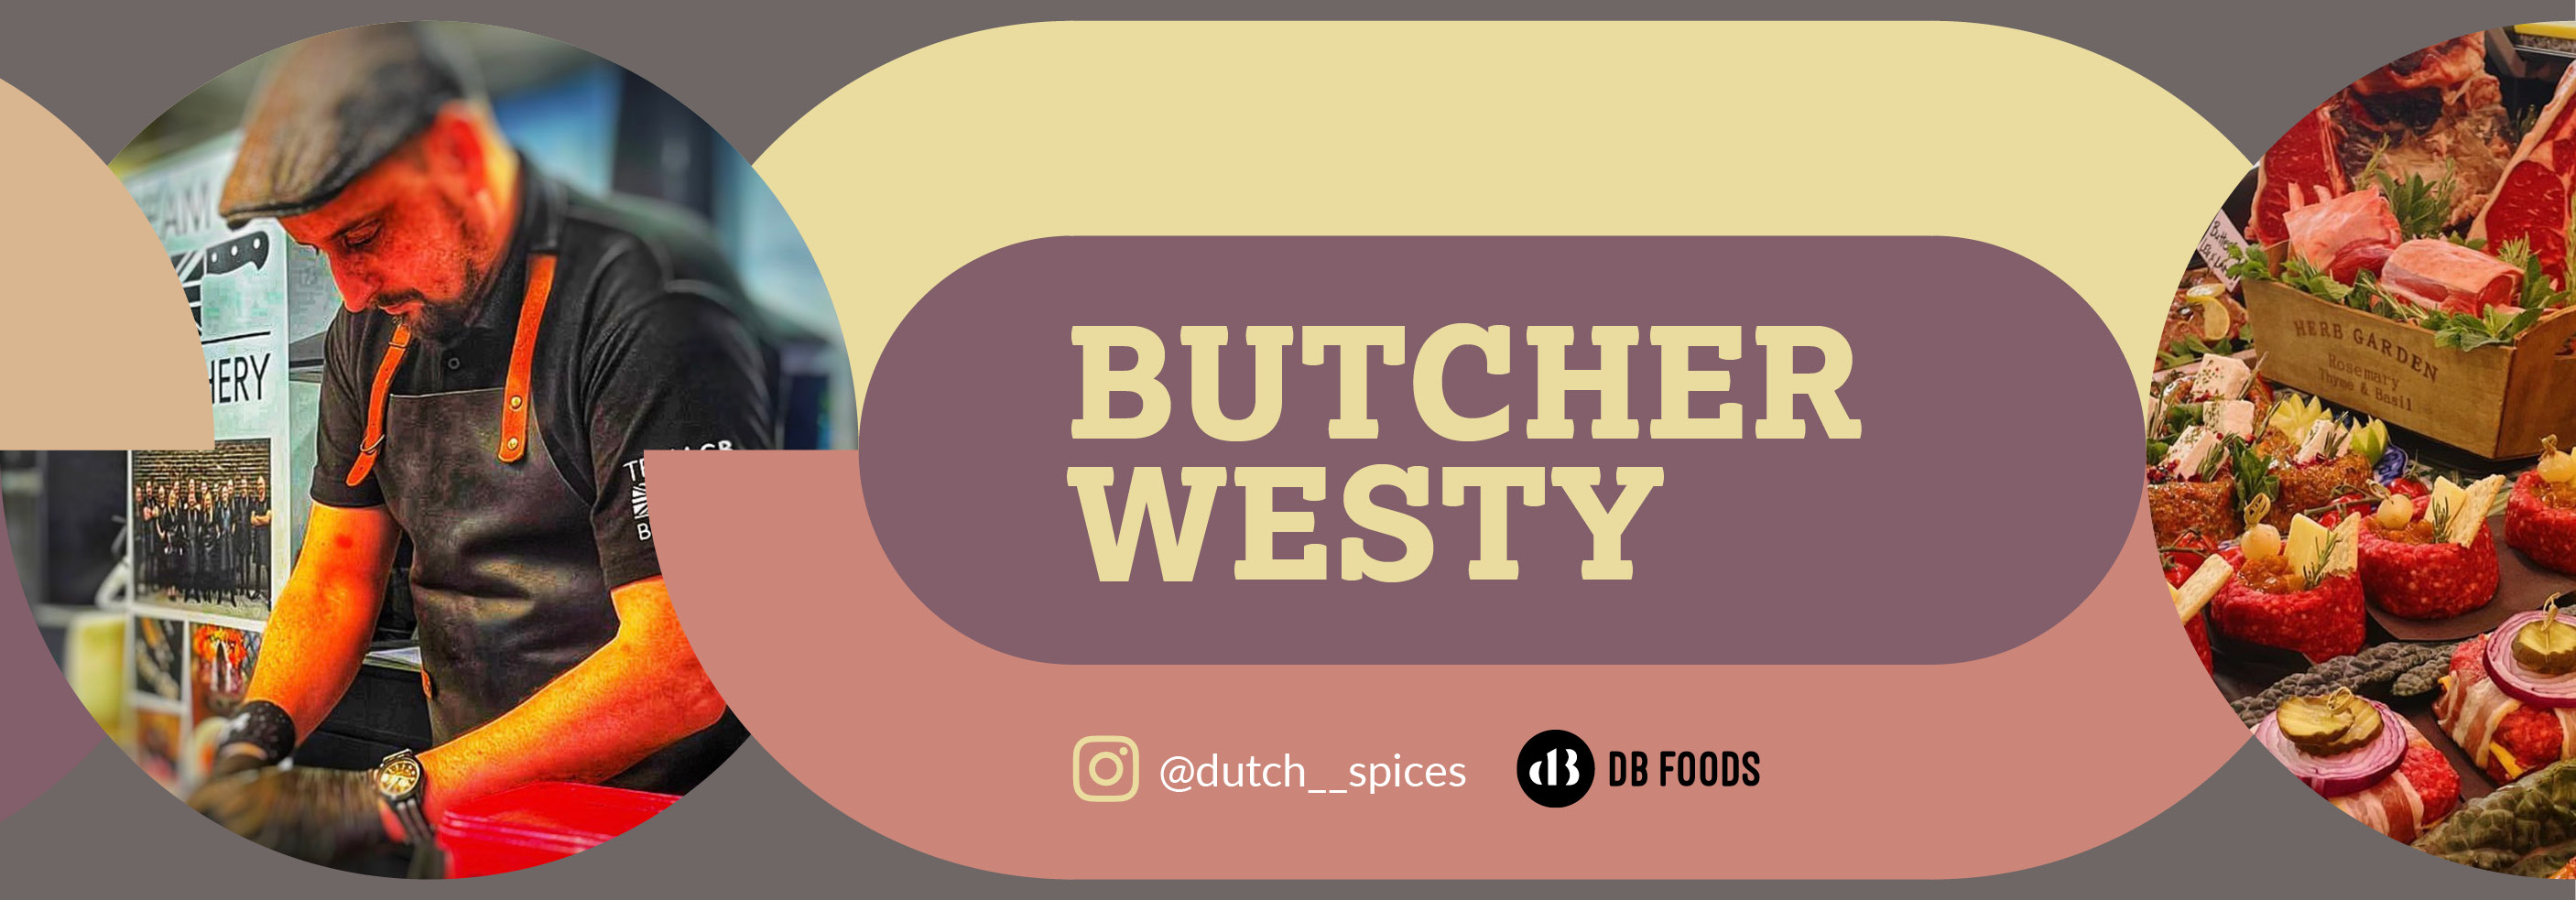 Make the acquaintance of Butcher Westy